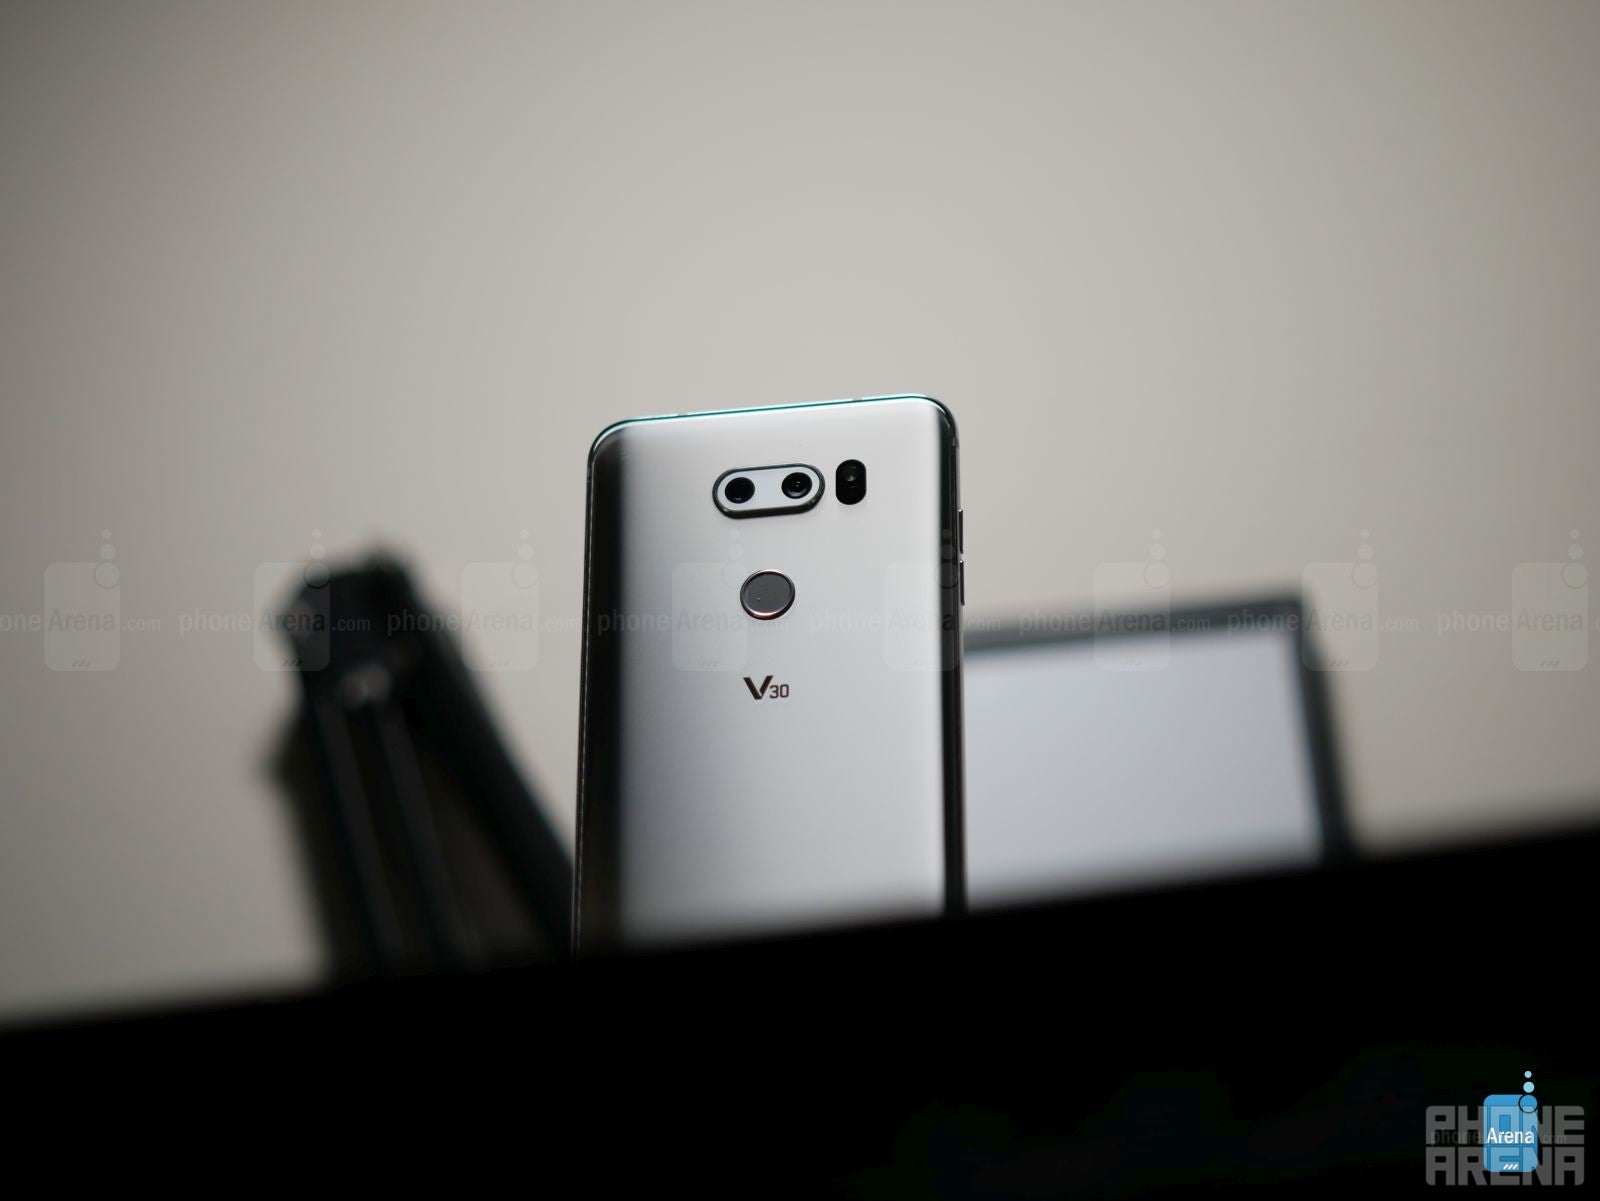 How to achieve that cinema style look with the LG V30